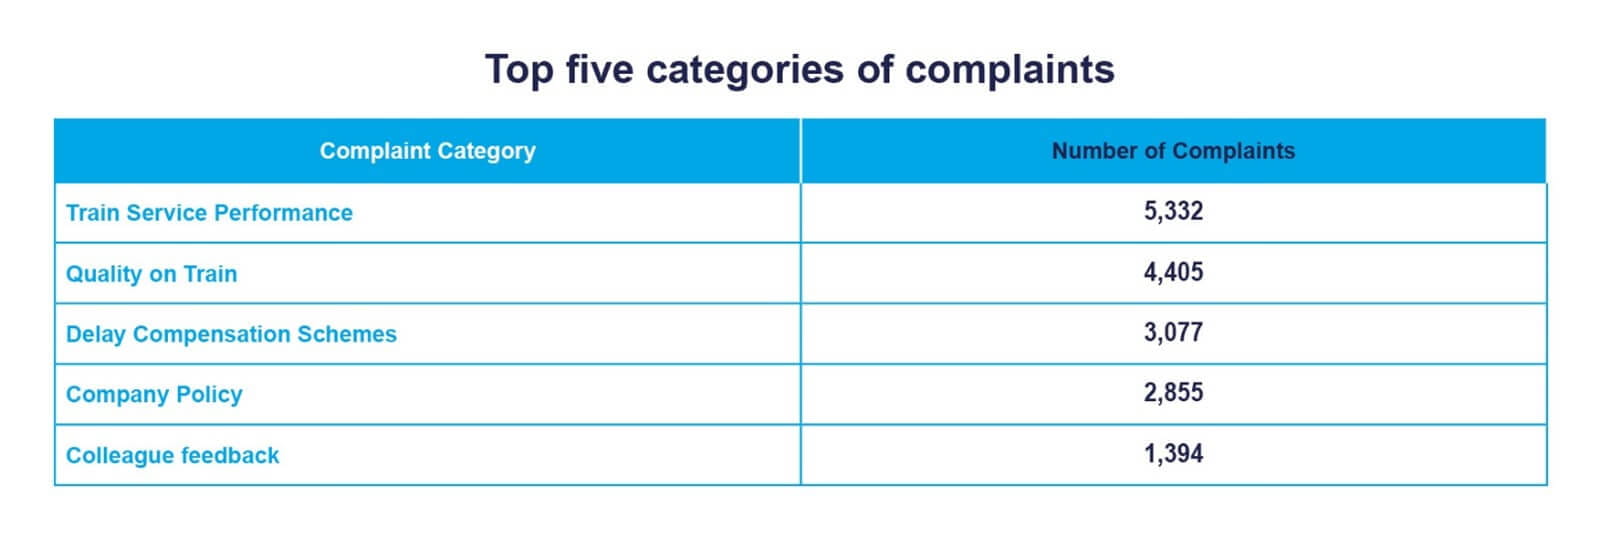 An infographic showing the top 5 categories for complaints. These are train service performance, quality on train, delay compensation schemes, company policy and colleague feedback.